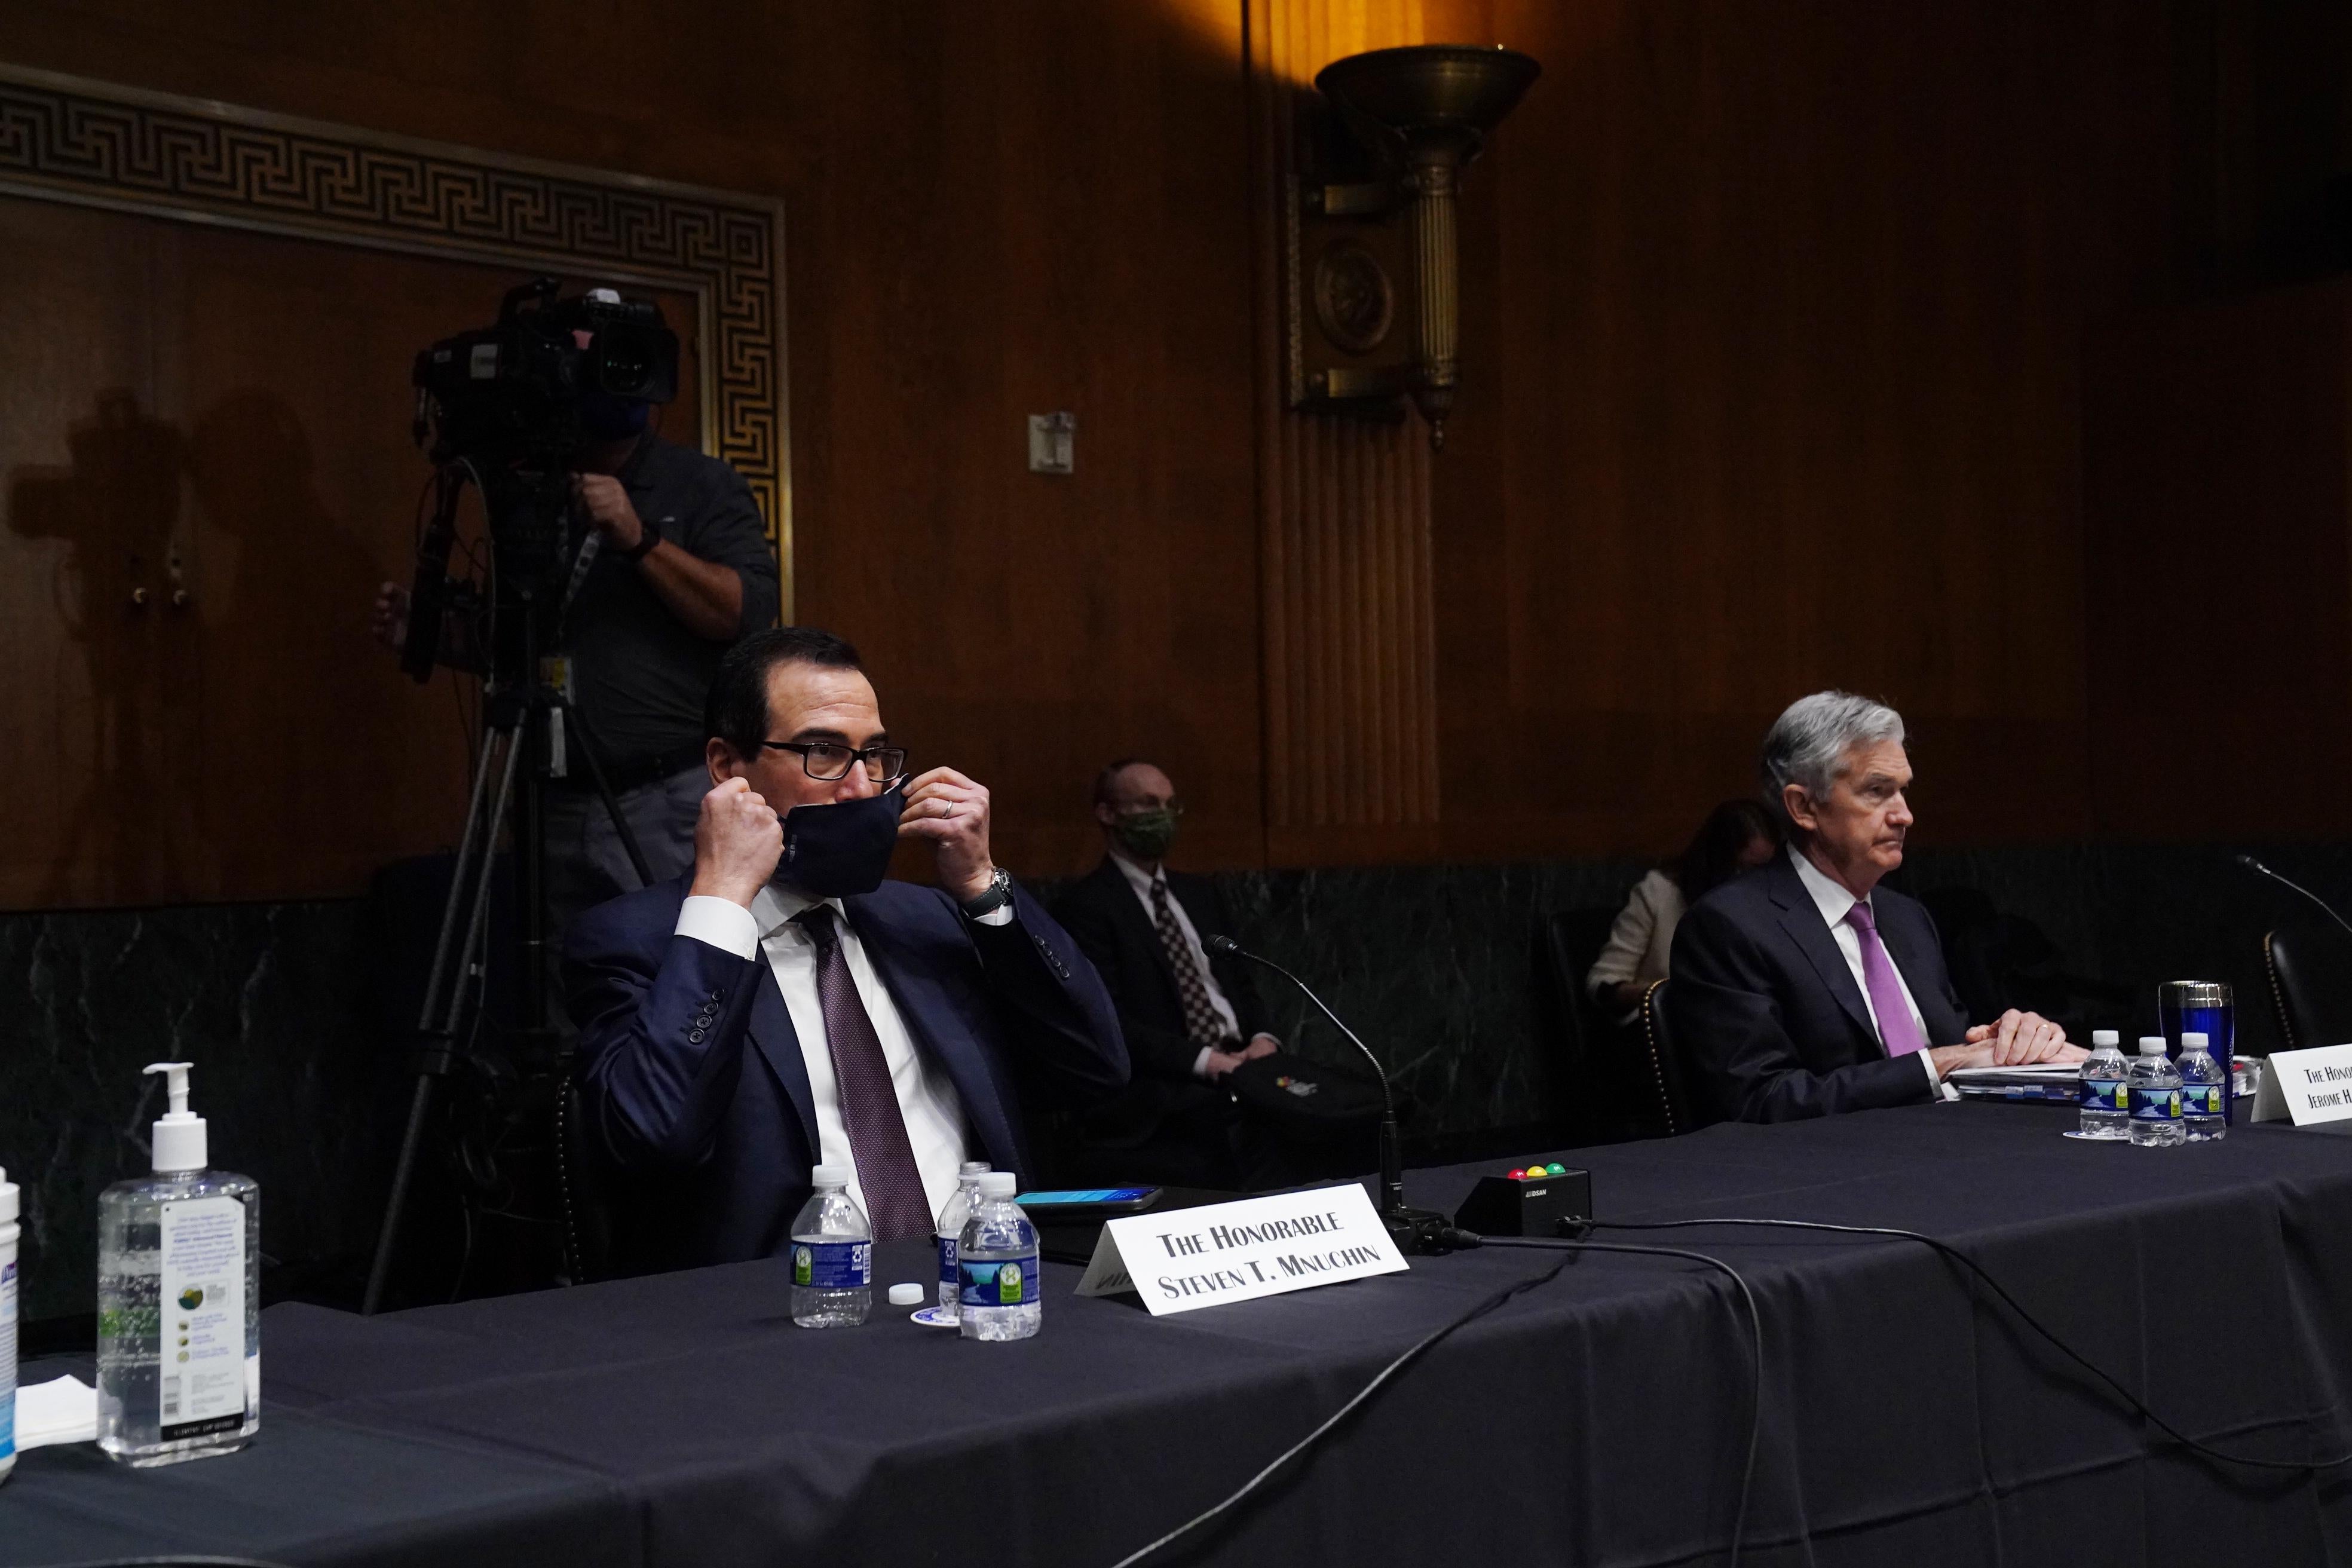 Mnuchin puts on a mask while sitting next to Jerome Powell at a long table in a Senate hearing room